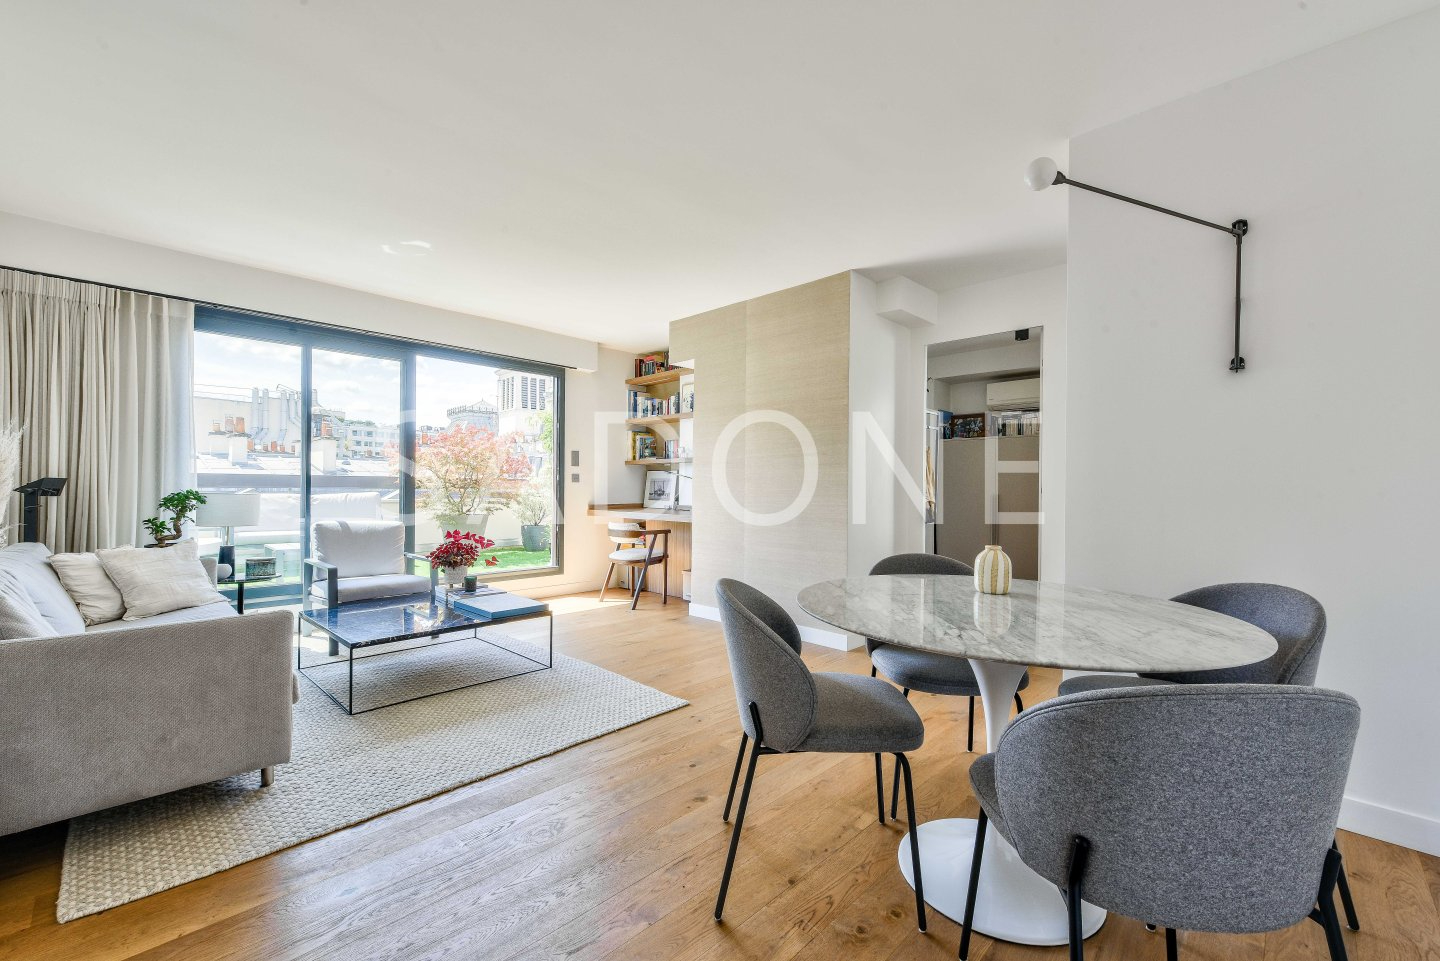 PONT DE NEUILLY – Appartement 61m2 – 2 Chambres / Terrasse 25m2.